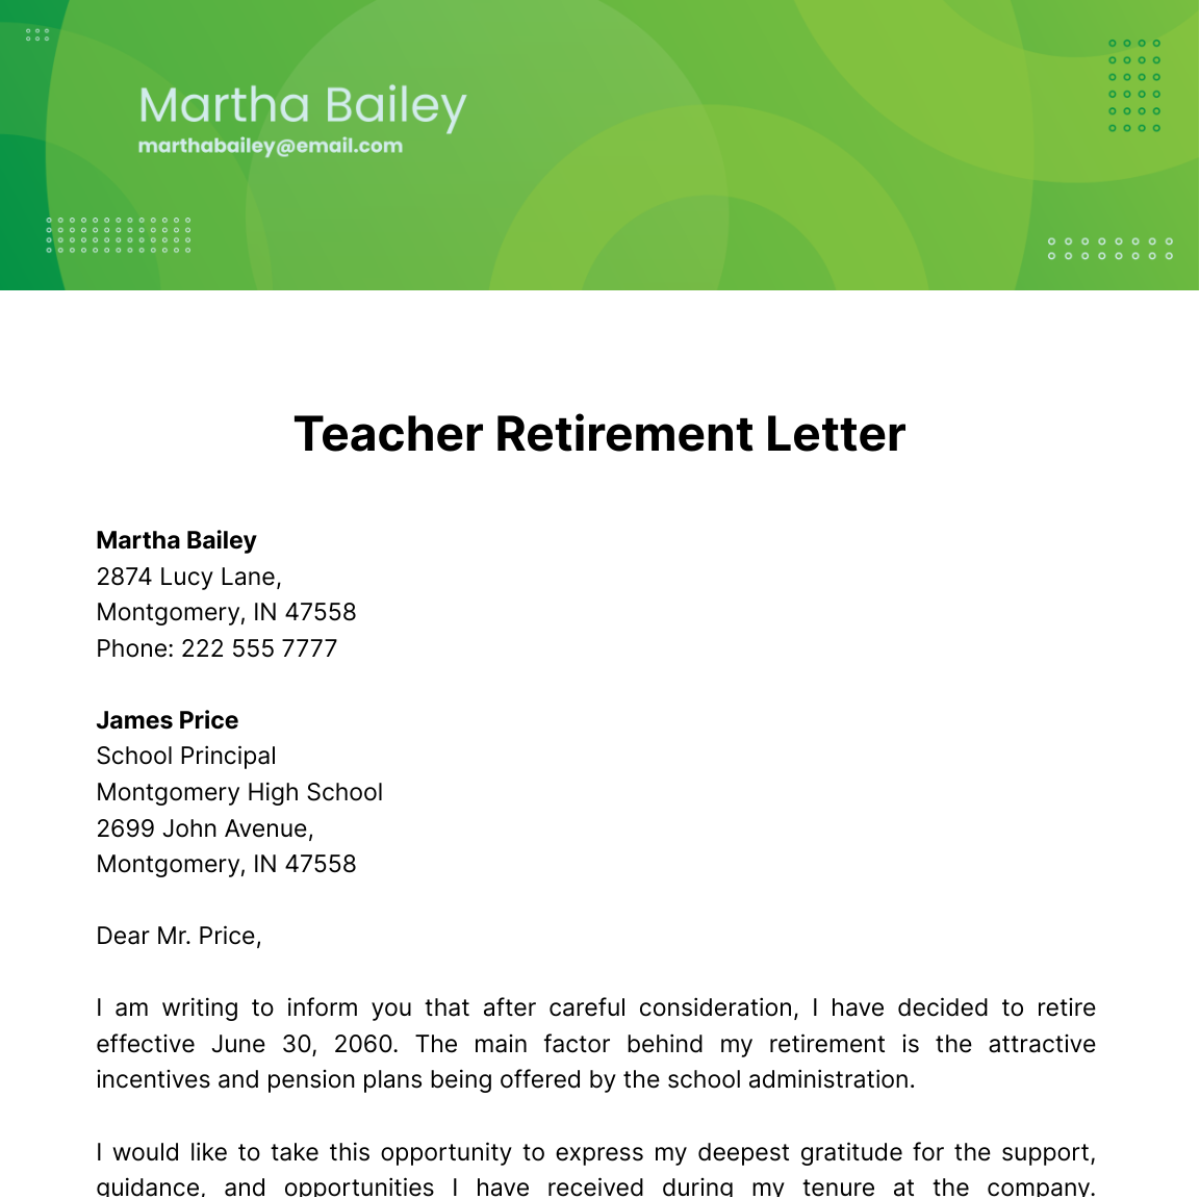 FREE Retirement Letter Templates Examples Edit Online Download